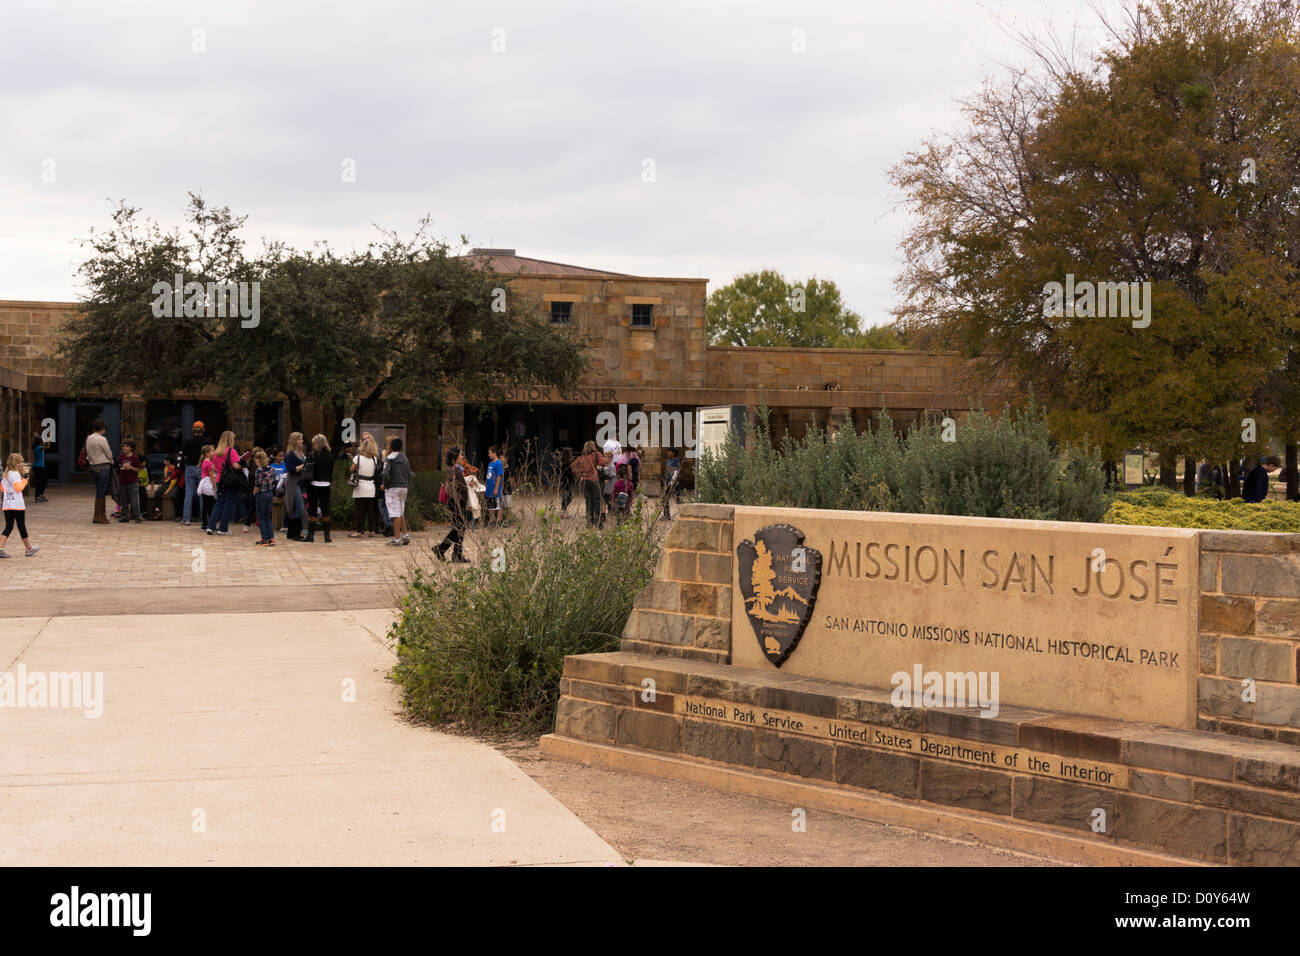 Mission San Jose' visitor center with National Park Service sign In foreground. Stock Photo